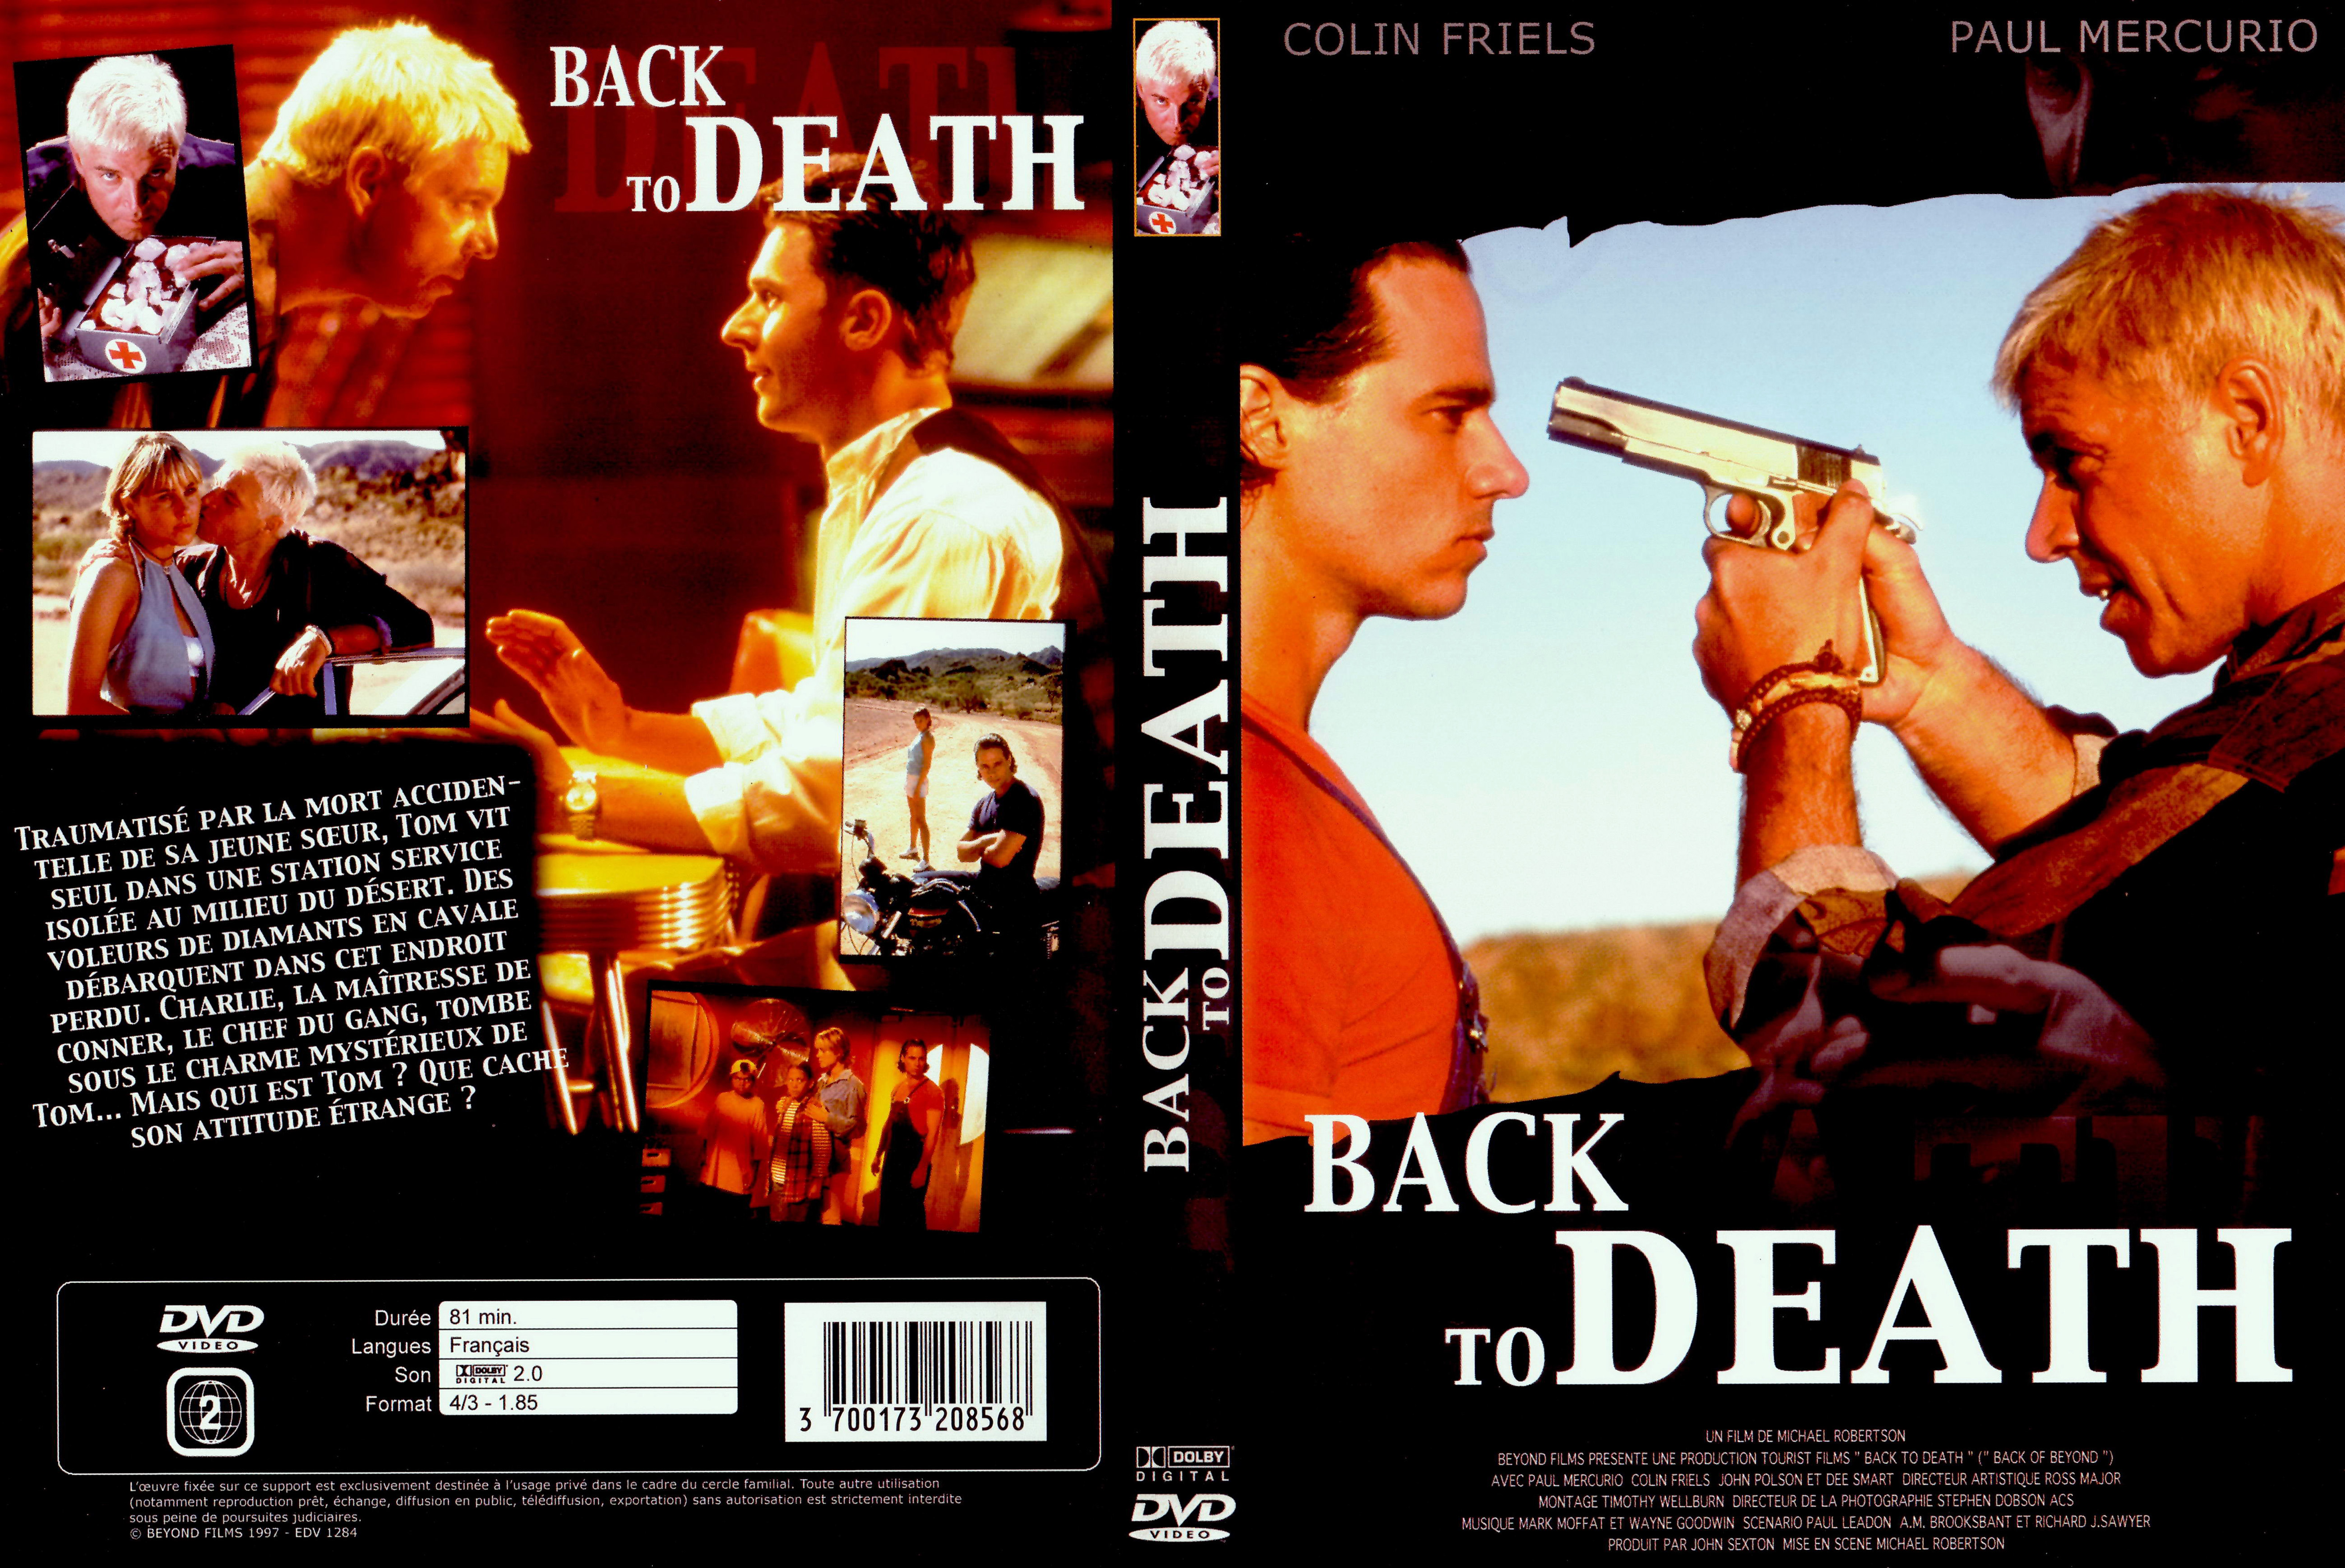 Jaquette DVD Back to death